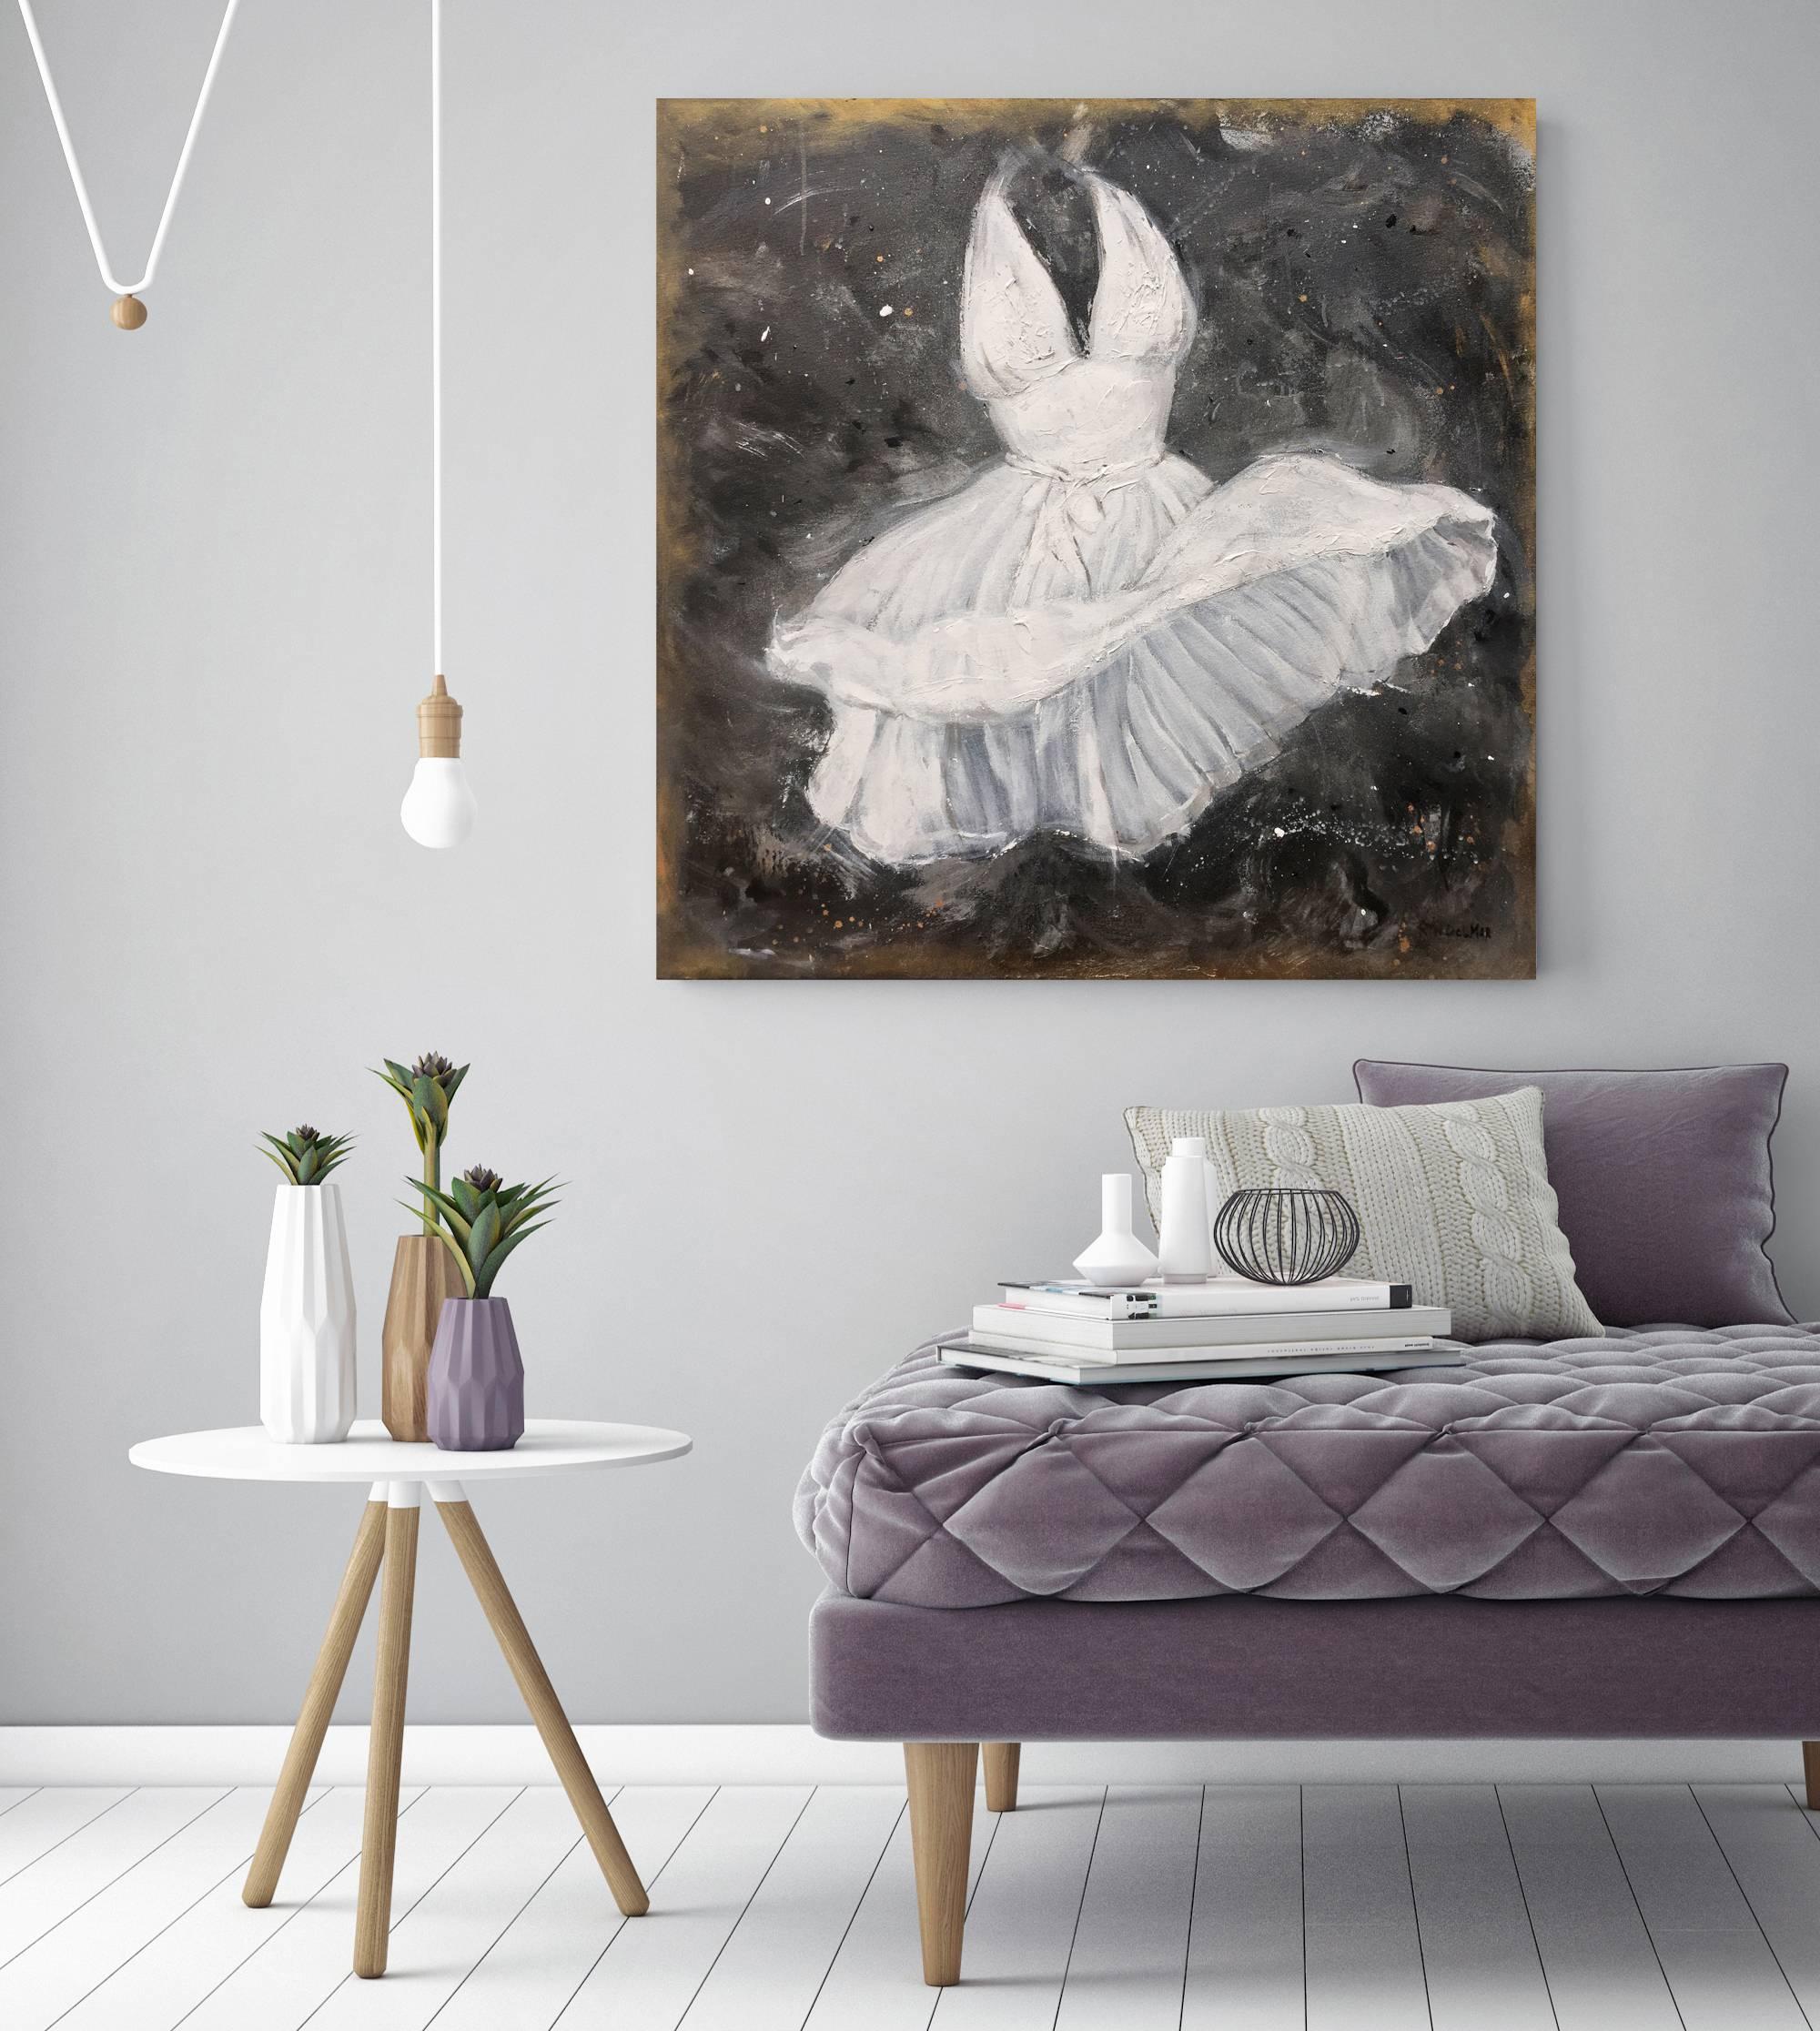 Black and white, antique gold color, tutu, ballerina, dance, kids room, dance studio, bedroom, texture, ballet, Marilyn Monroe, ballroom, Marilyn Monroe, white dress, The Seven Year Itch, old hollywood

Although currently residing in New York City,